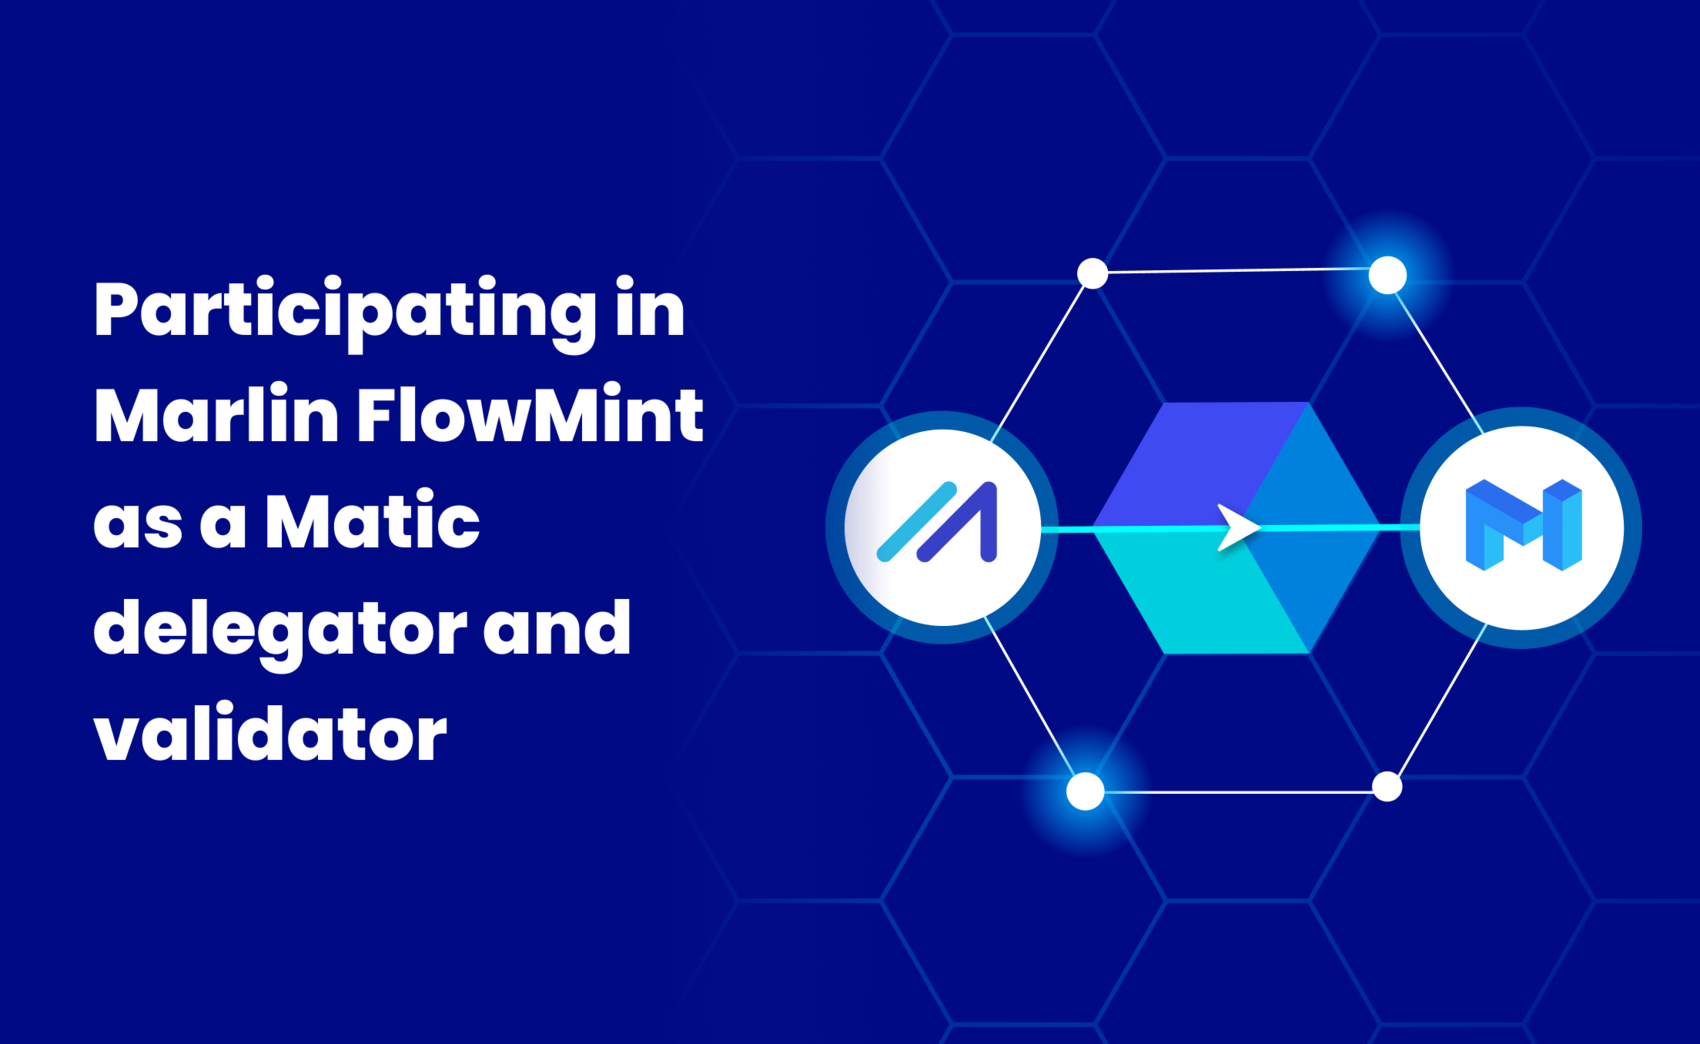 Participating in Marlin FlowMint as a Matic delegator and validator